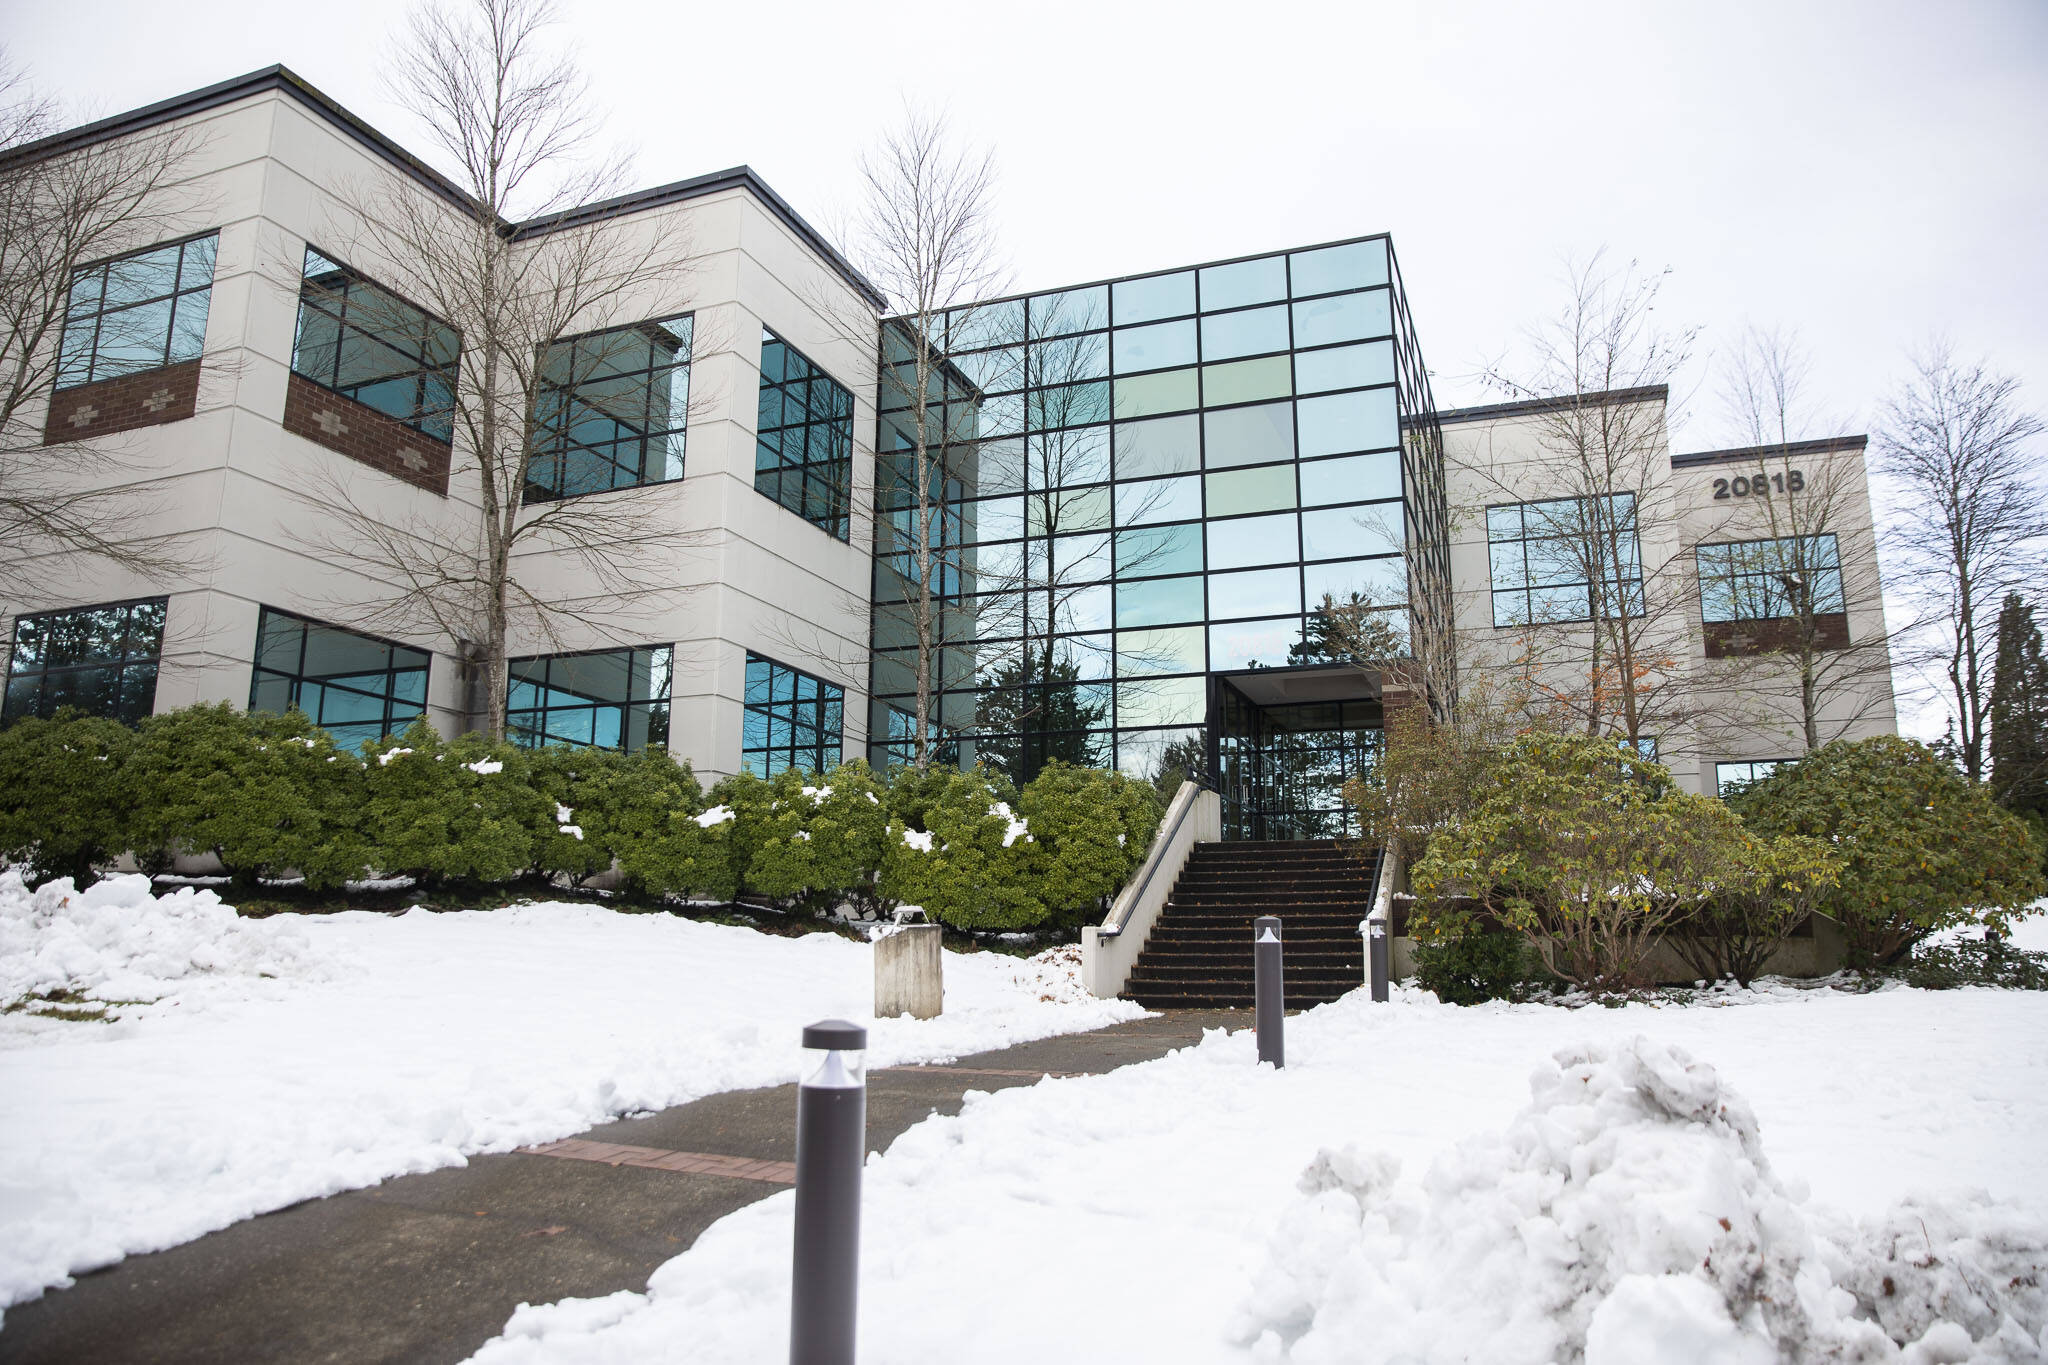 Snow lingered outside the office building of Receivables Performance Management on Thursday, Dec. 1, 2022, in Lynnwood, Washington. (Olivia Vanni / The Herald)